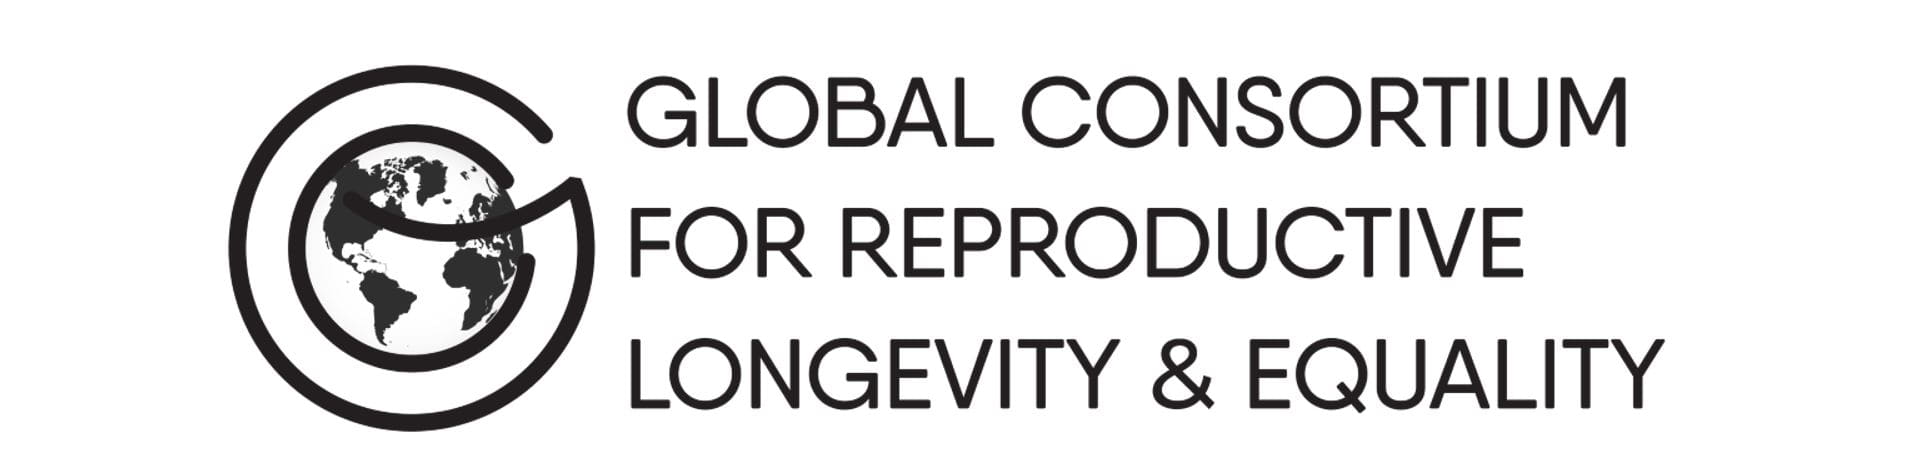 Buck-Institute-Global-Consortium-for-Reproductive-Longevity-and-Equality-Logo